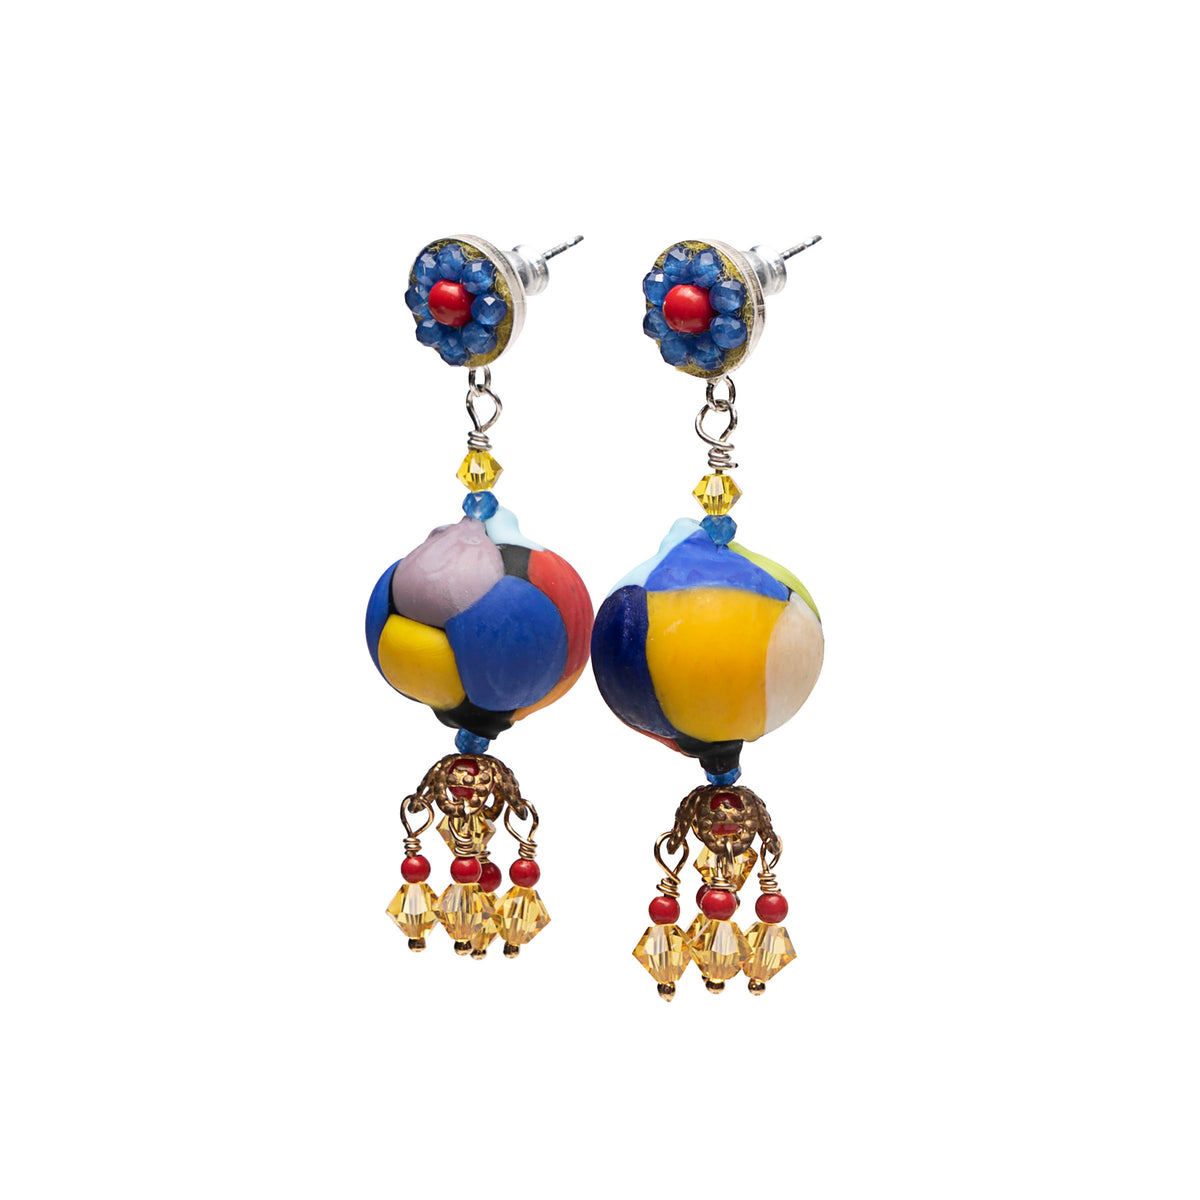 Wanderlust Murano glass earring with coral and lapis mosaic (Murano)